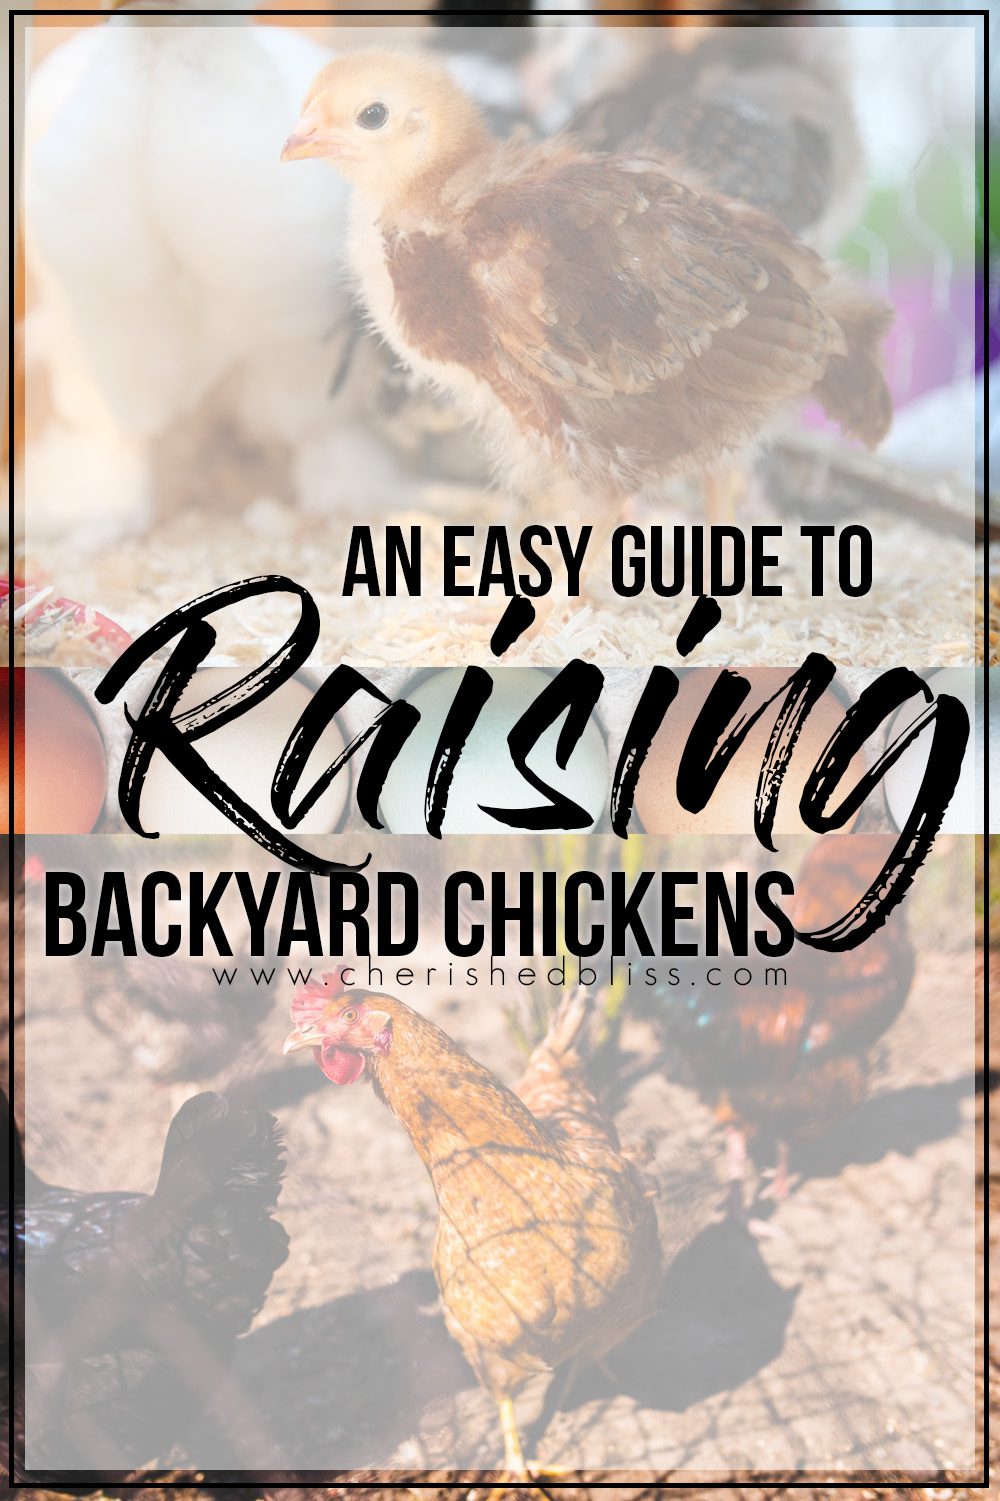 An Easy Guide to Raising Backyard Chickens